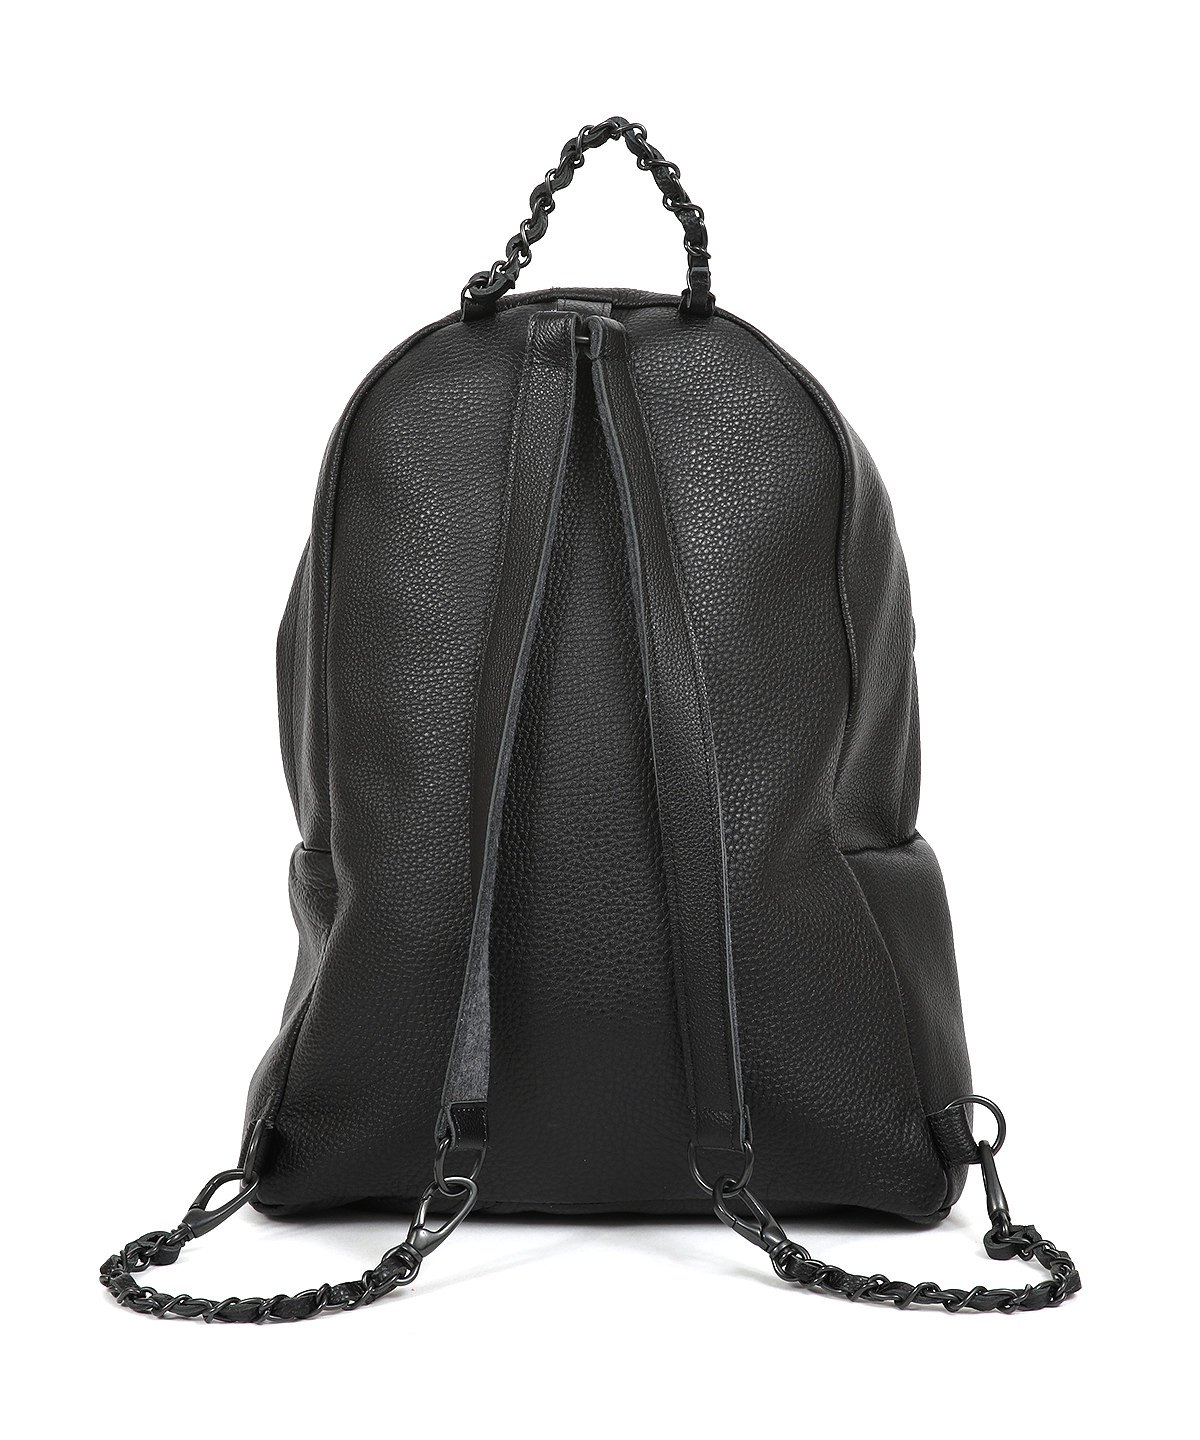 OUTDOOR LEATHER DAYPACK